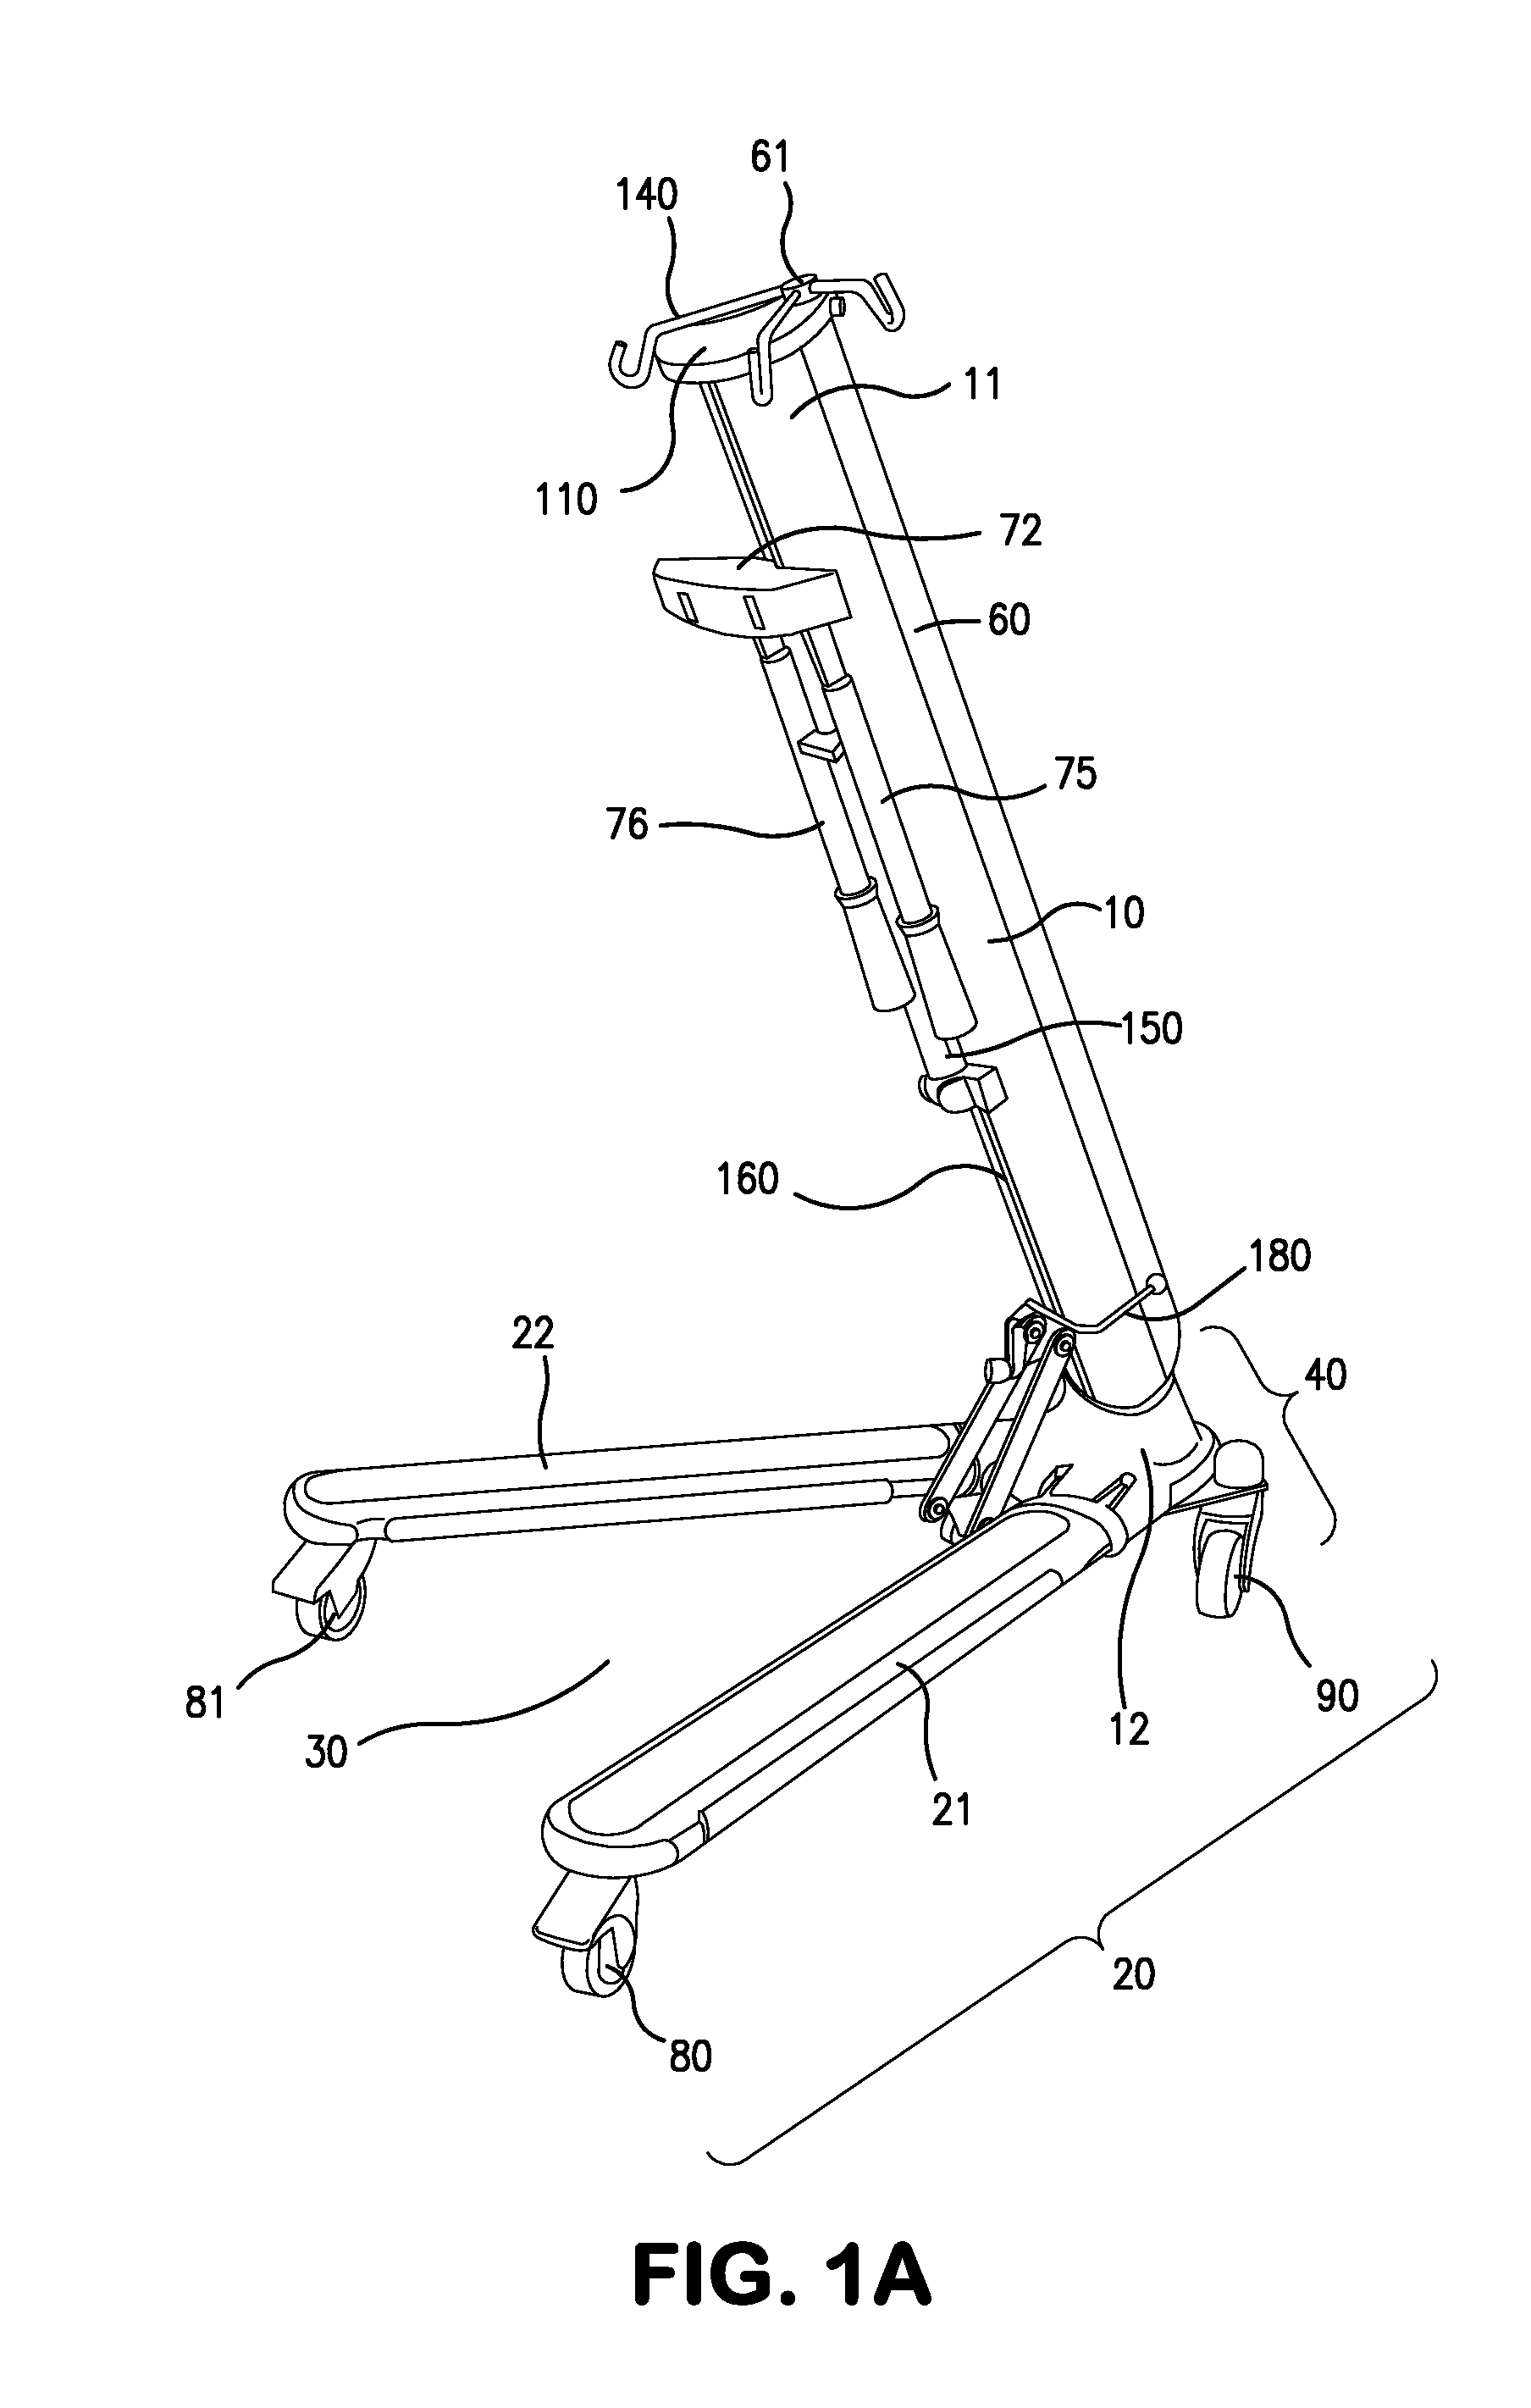 Devices for mobility assistance and infusion management